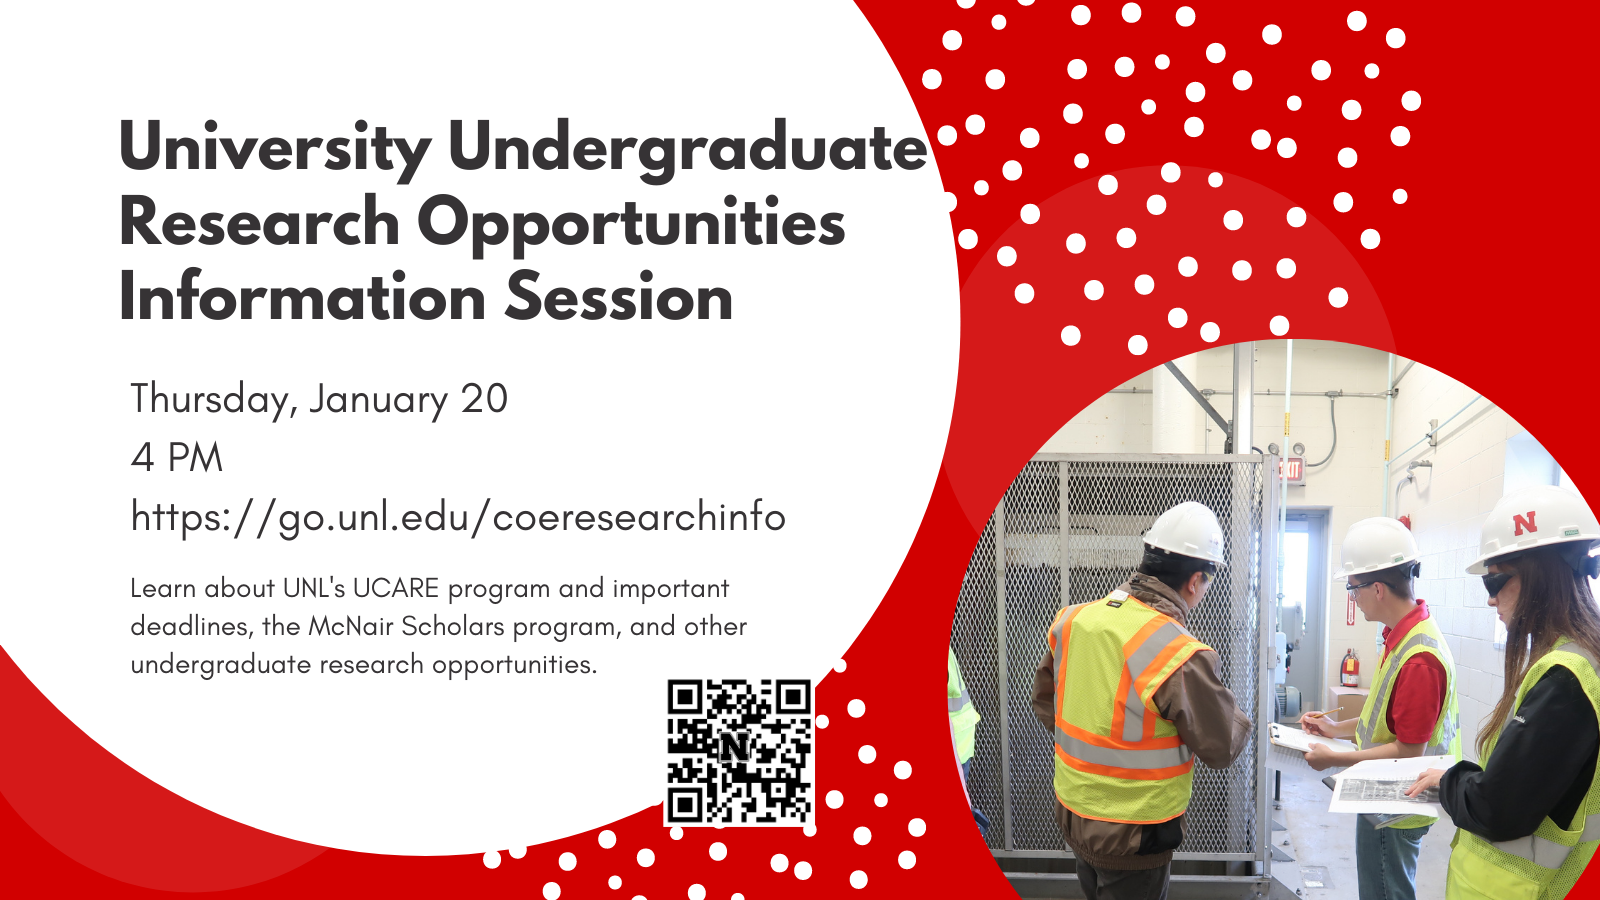 Students interested in learning more about undergraduate research opportunities are invited to attend an information session next Thursday, Jan. 20 at 4 p.m. via Zoom.